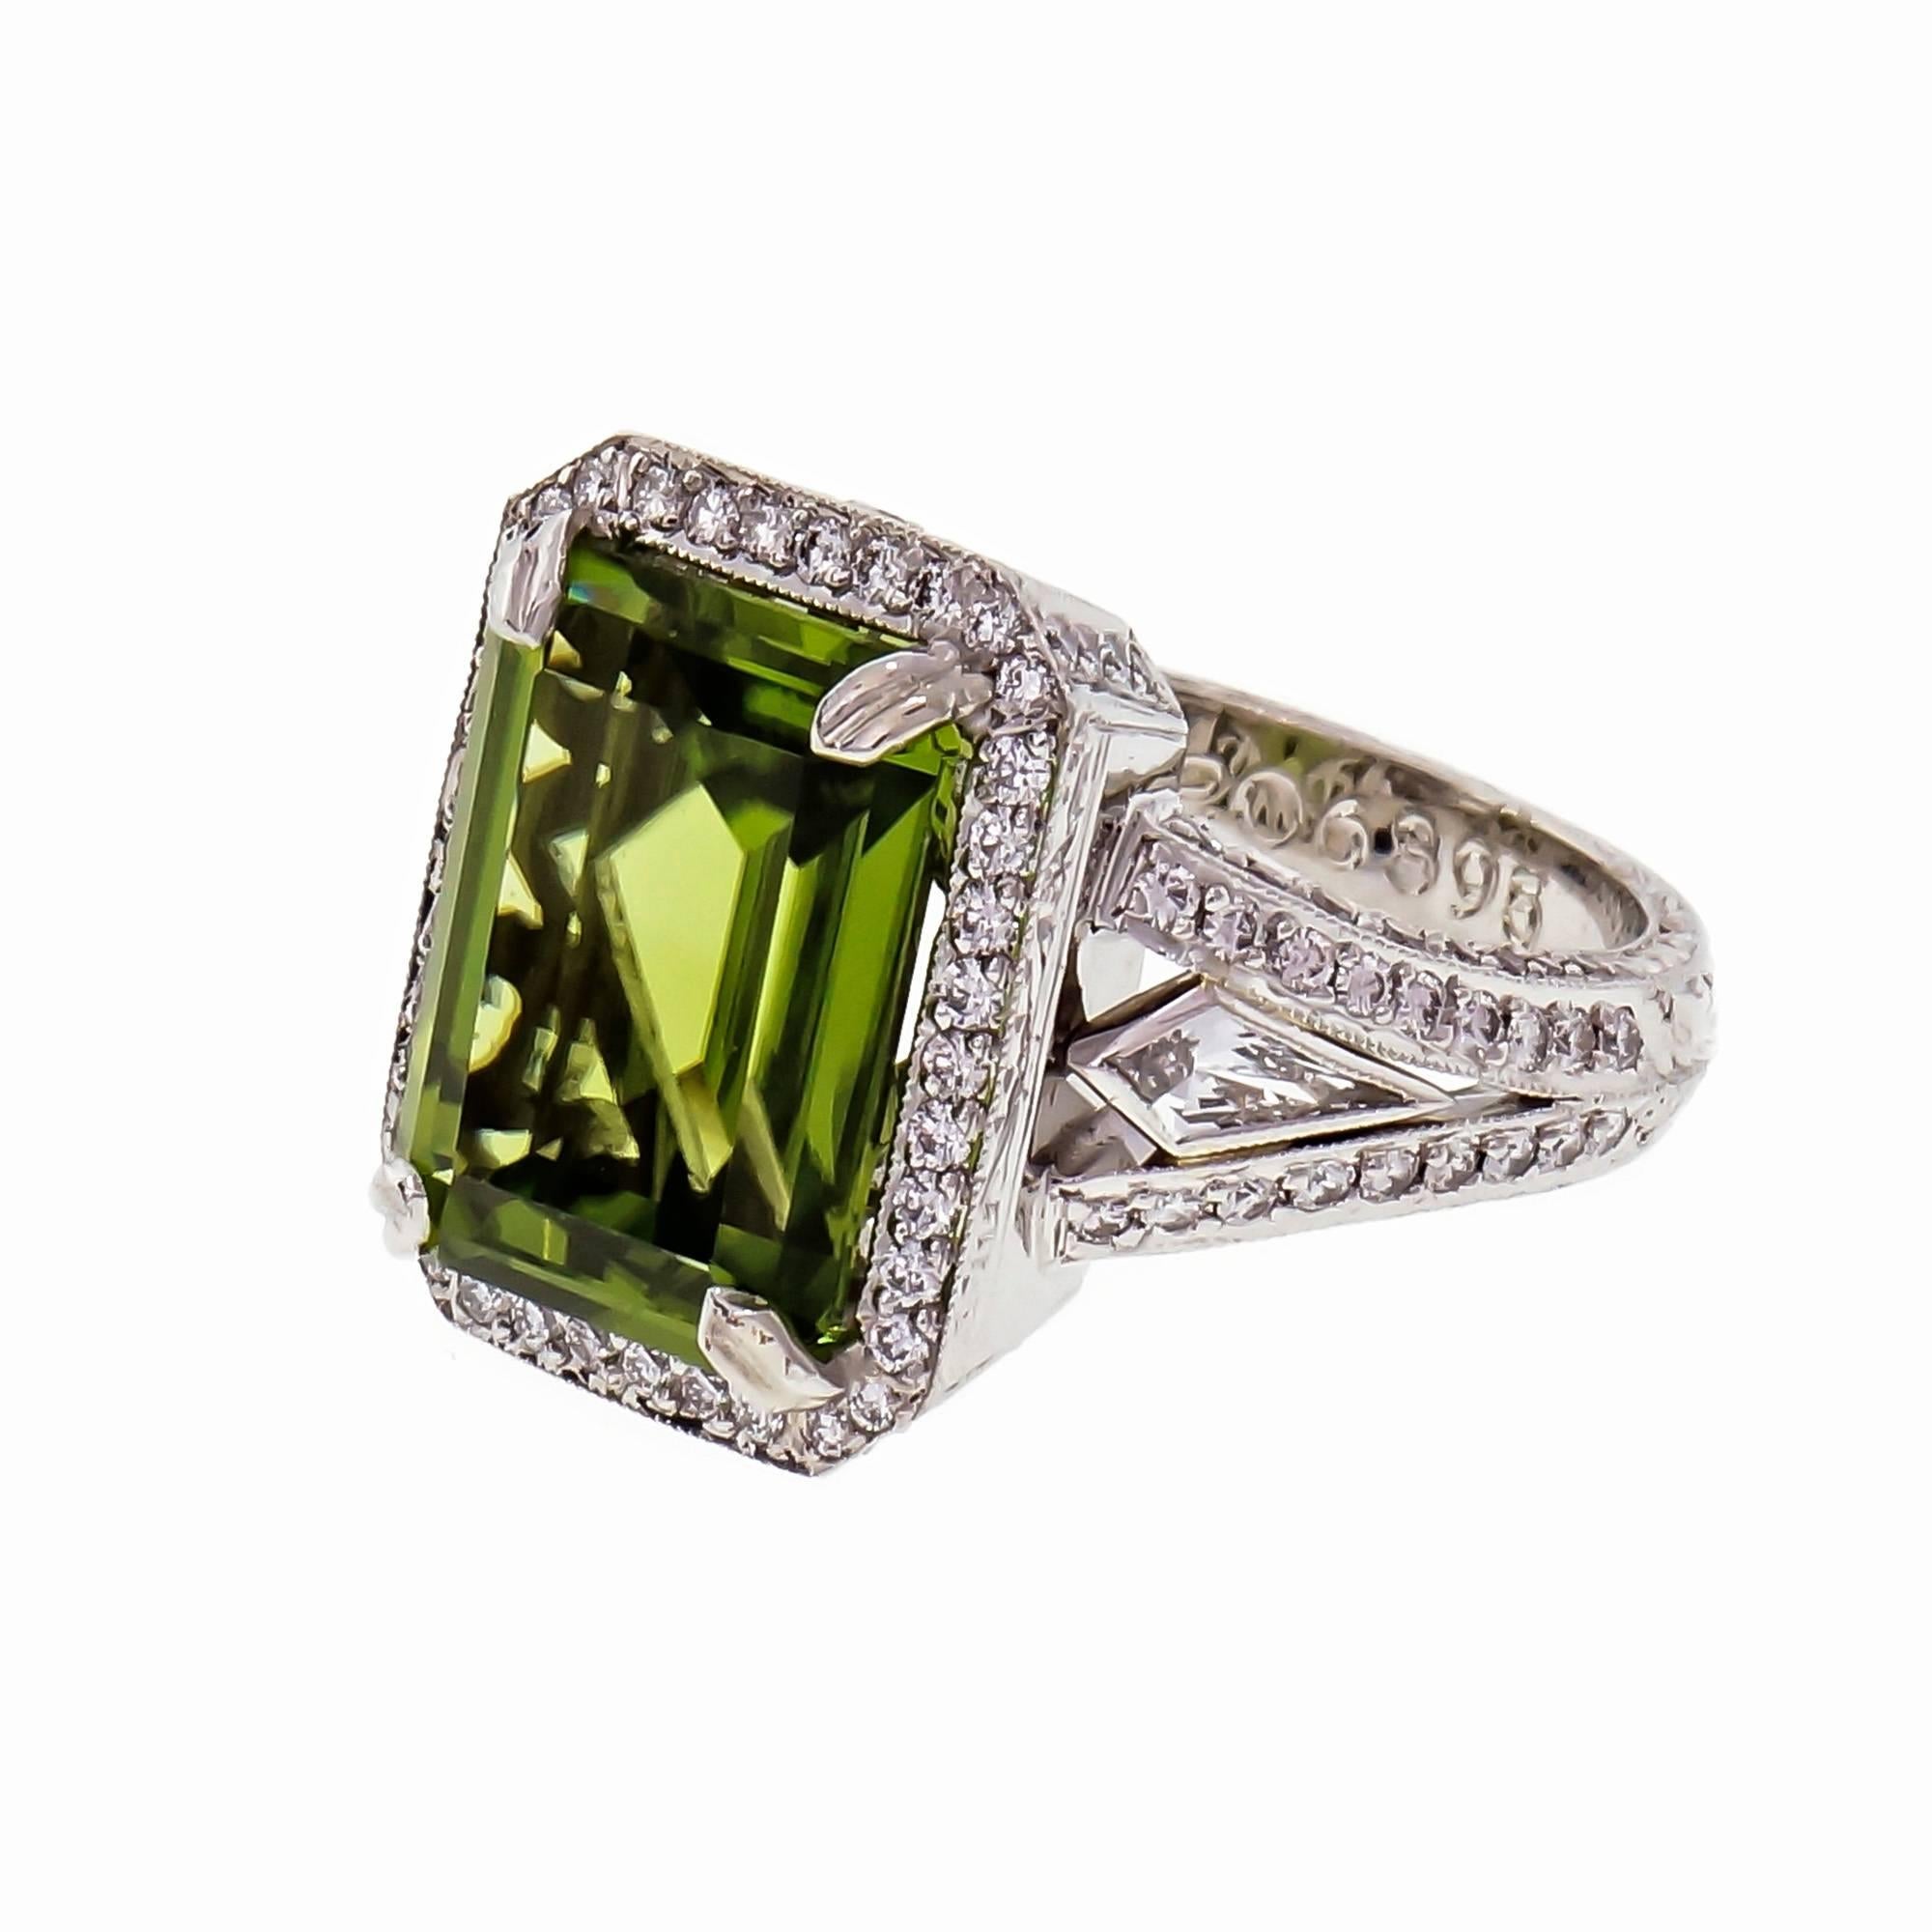 Michael Beaudry Peridot and diamond Platinum cocktail ring. 6.82ct center Peridot with Pavé set full cut and kite shape Diamonds, in a platinum halo setting. 

1 Emerald cut green Peridot, approx. total weight 6.82cts, VS 
2 kite shape Diamonds,